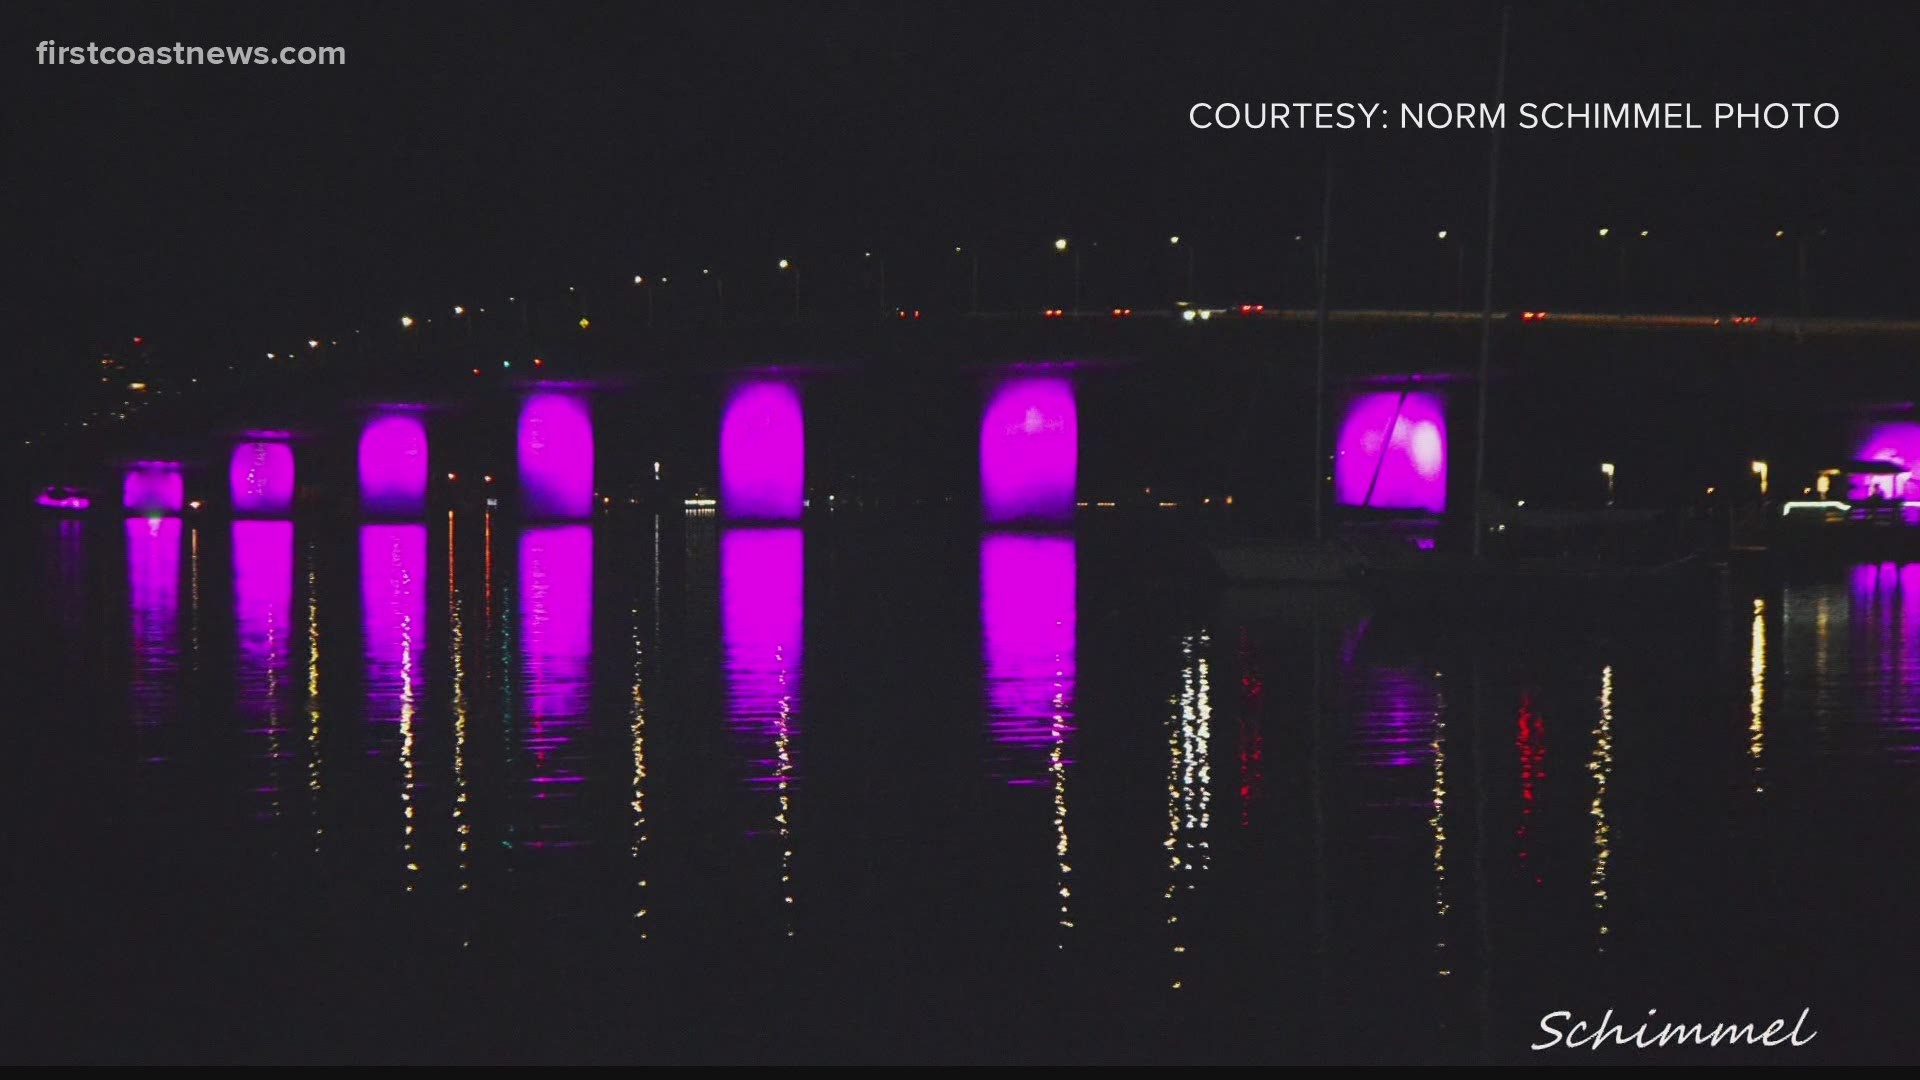 The mayor of Sarasota says his request was denied to light the Ringling Bridge for the month of June.